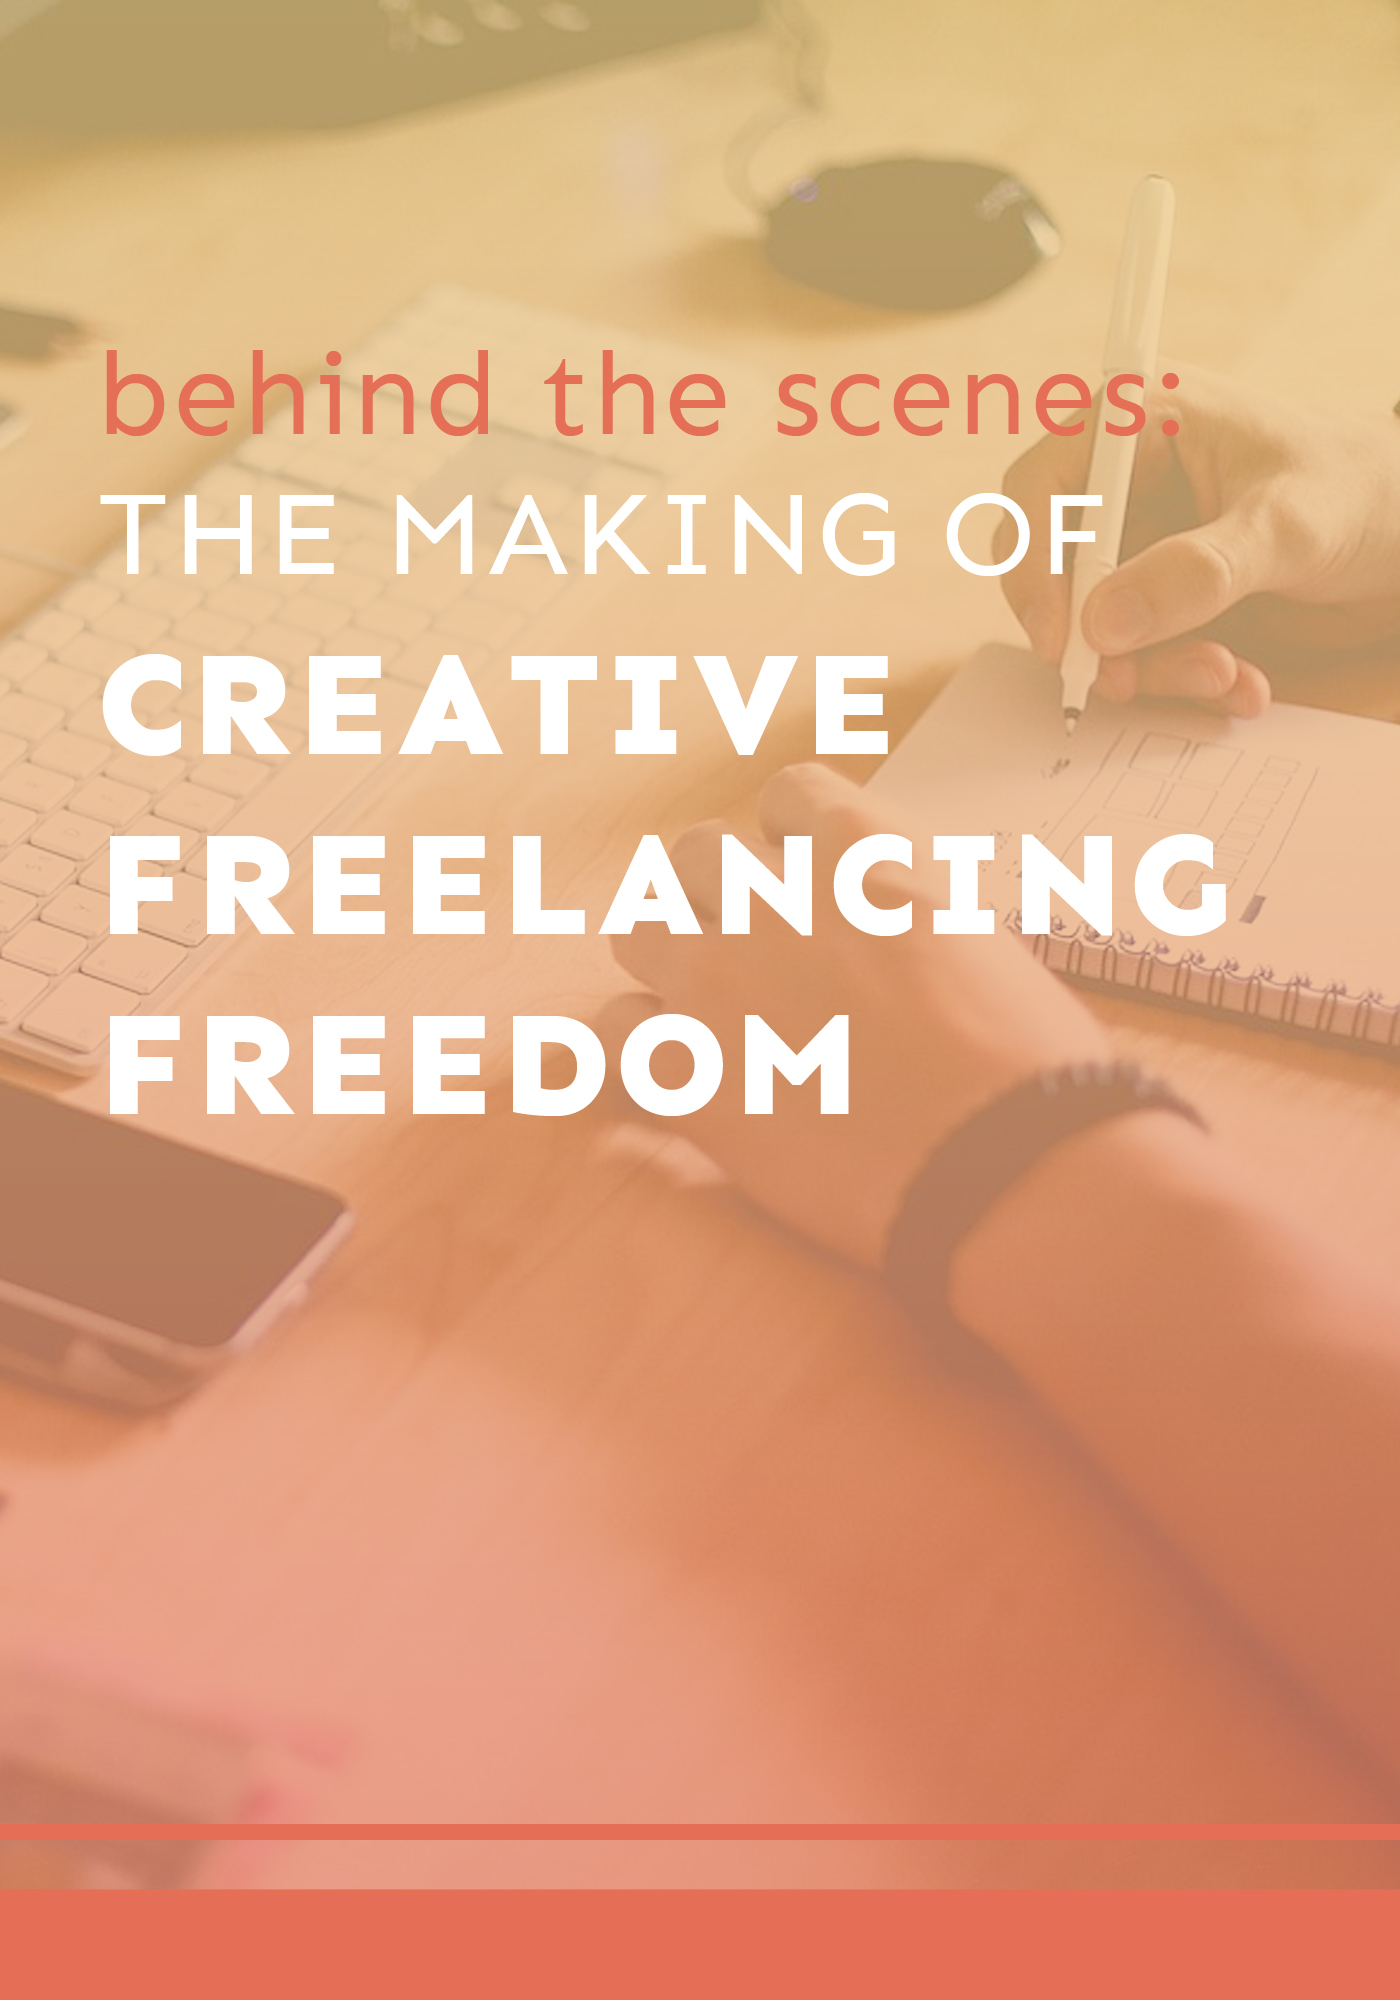 Go behind the scenes and learn how I came up with and created the concept behind Creative Freelancing Freedom